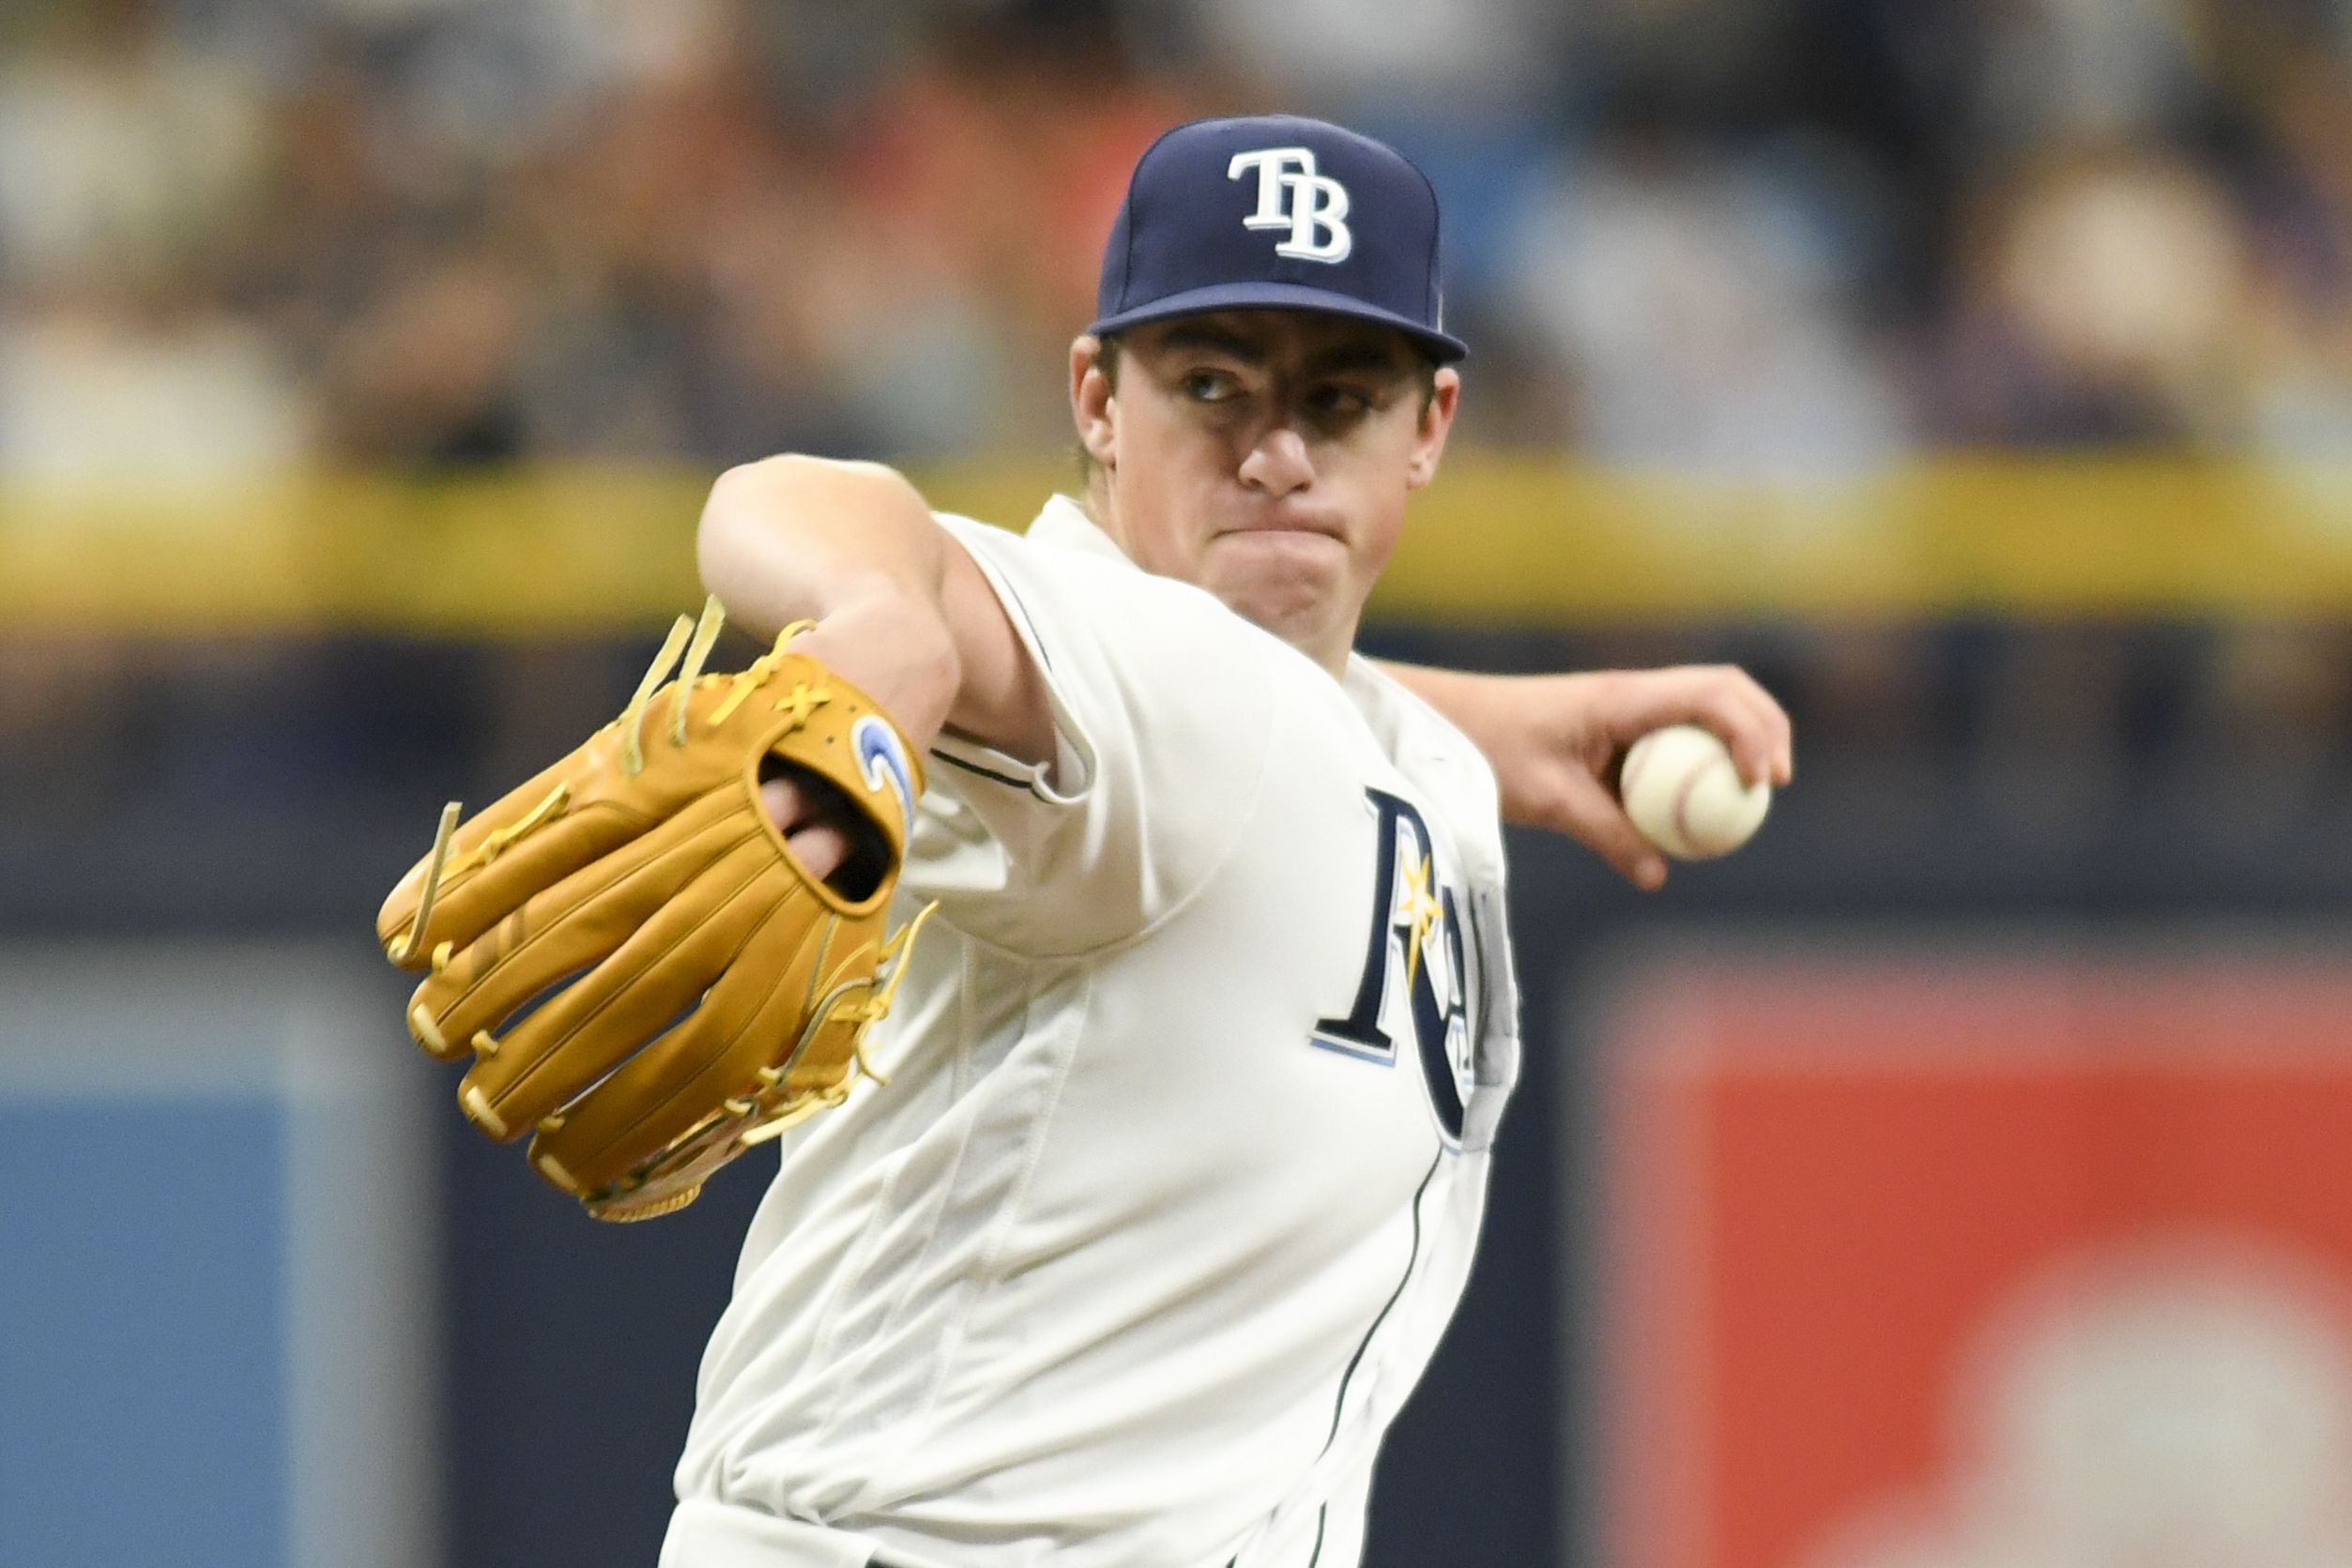 What a debut for Rays rookie Brendan McKay in 5-2 win